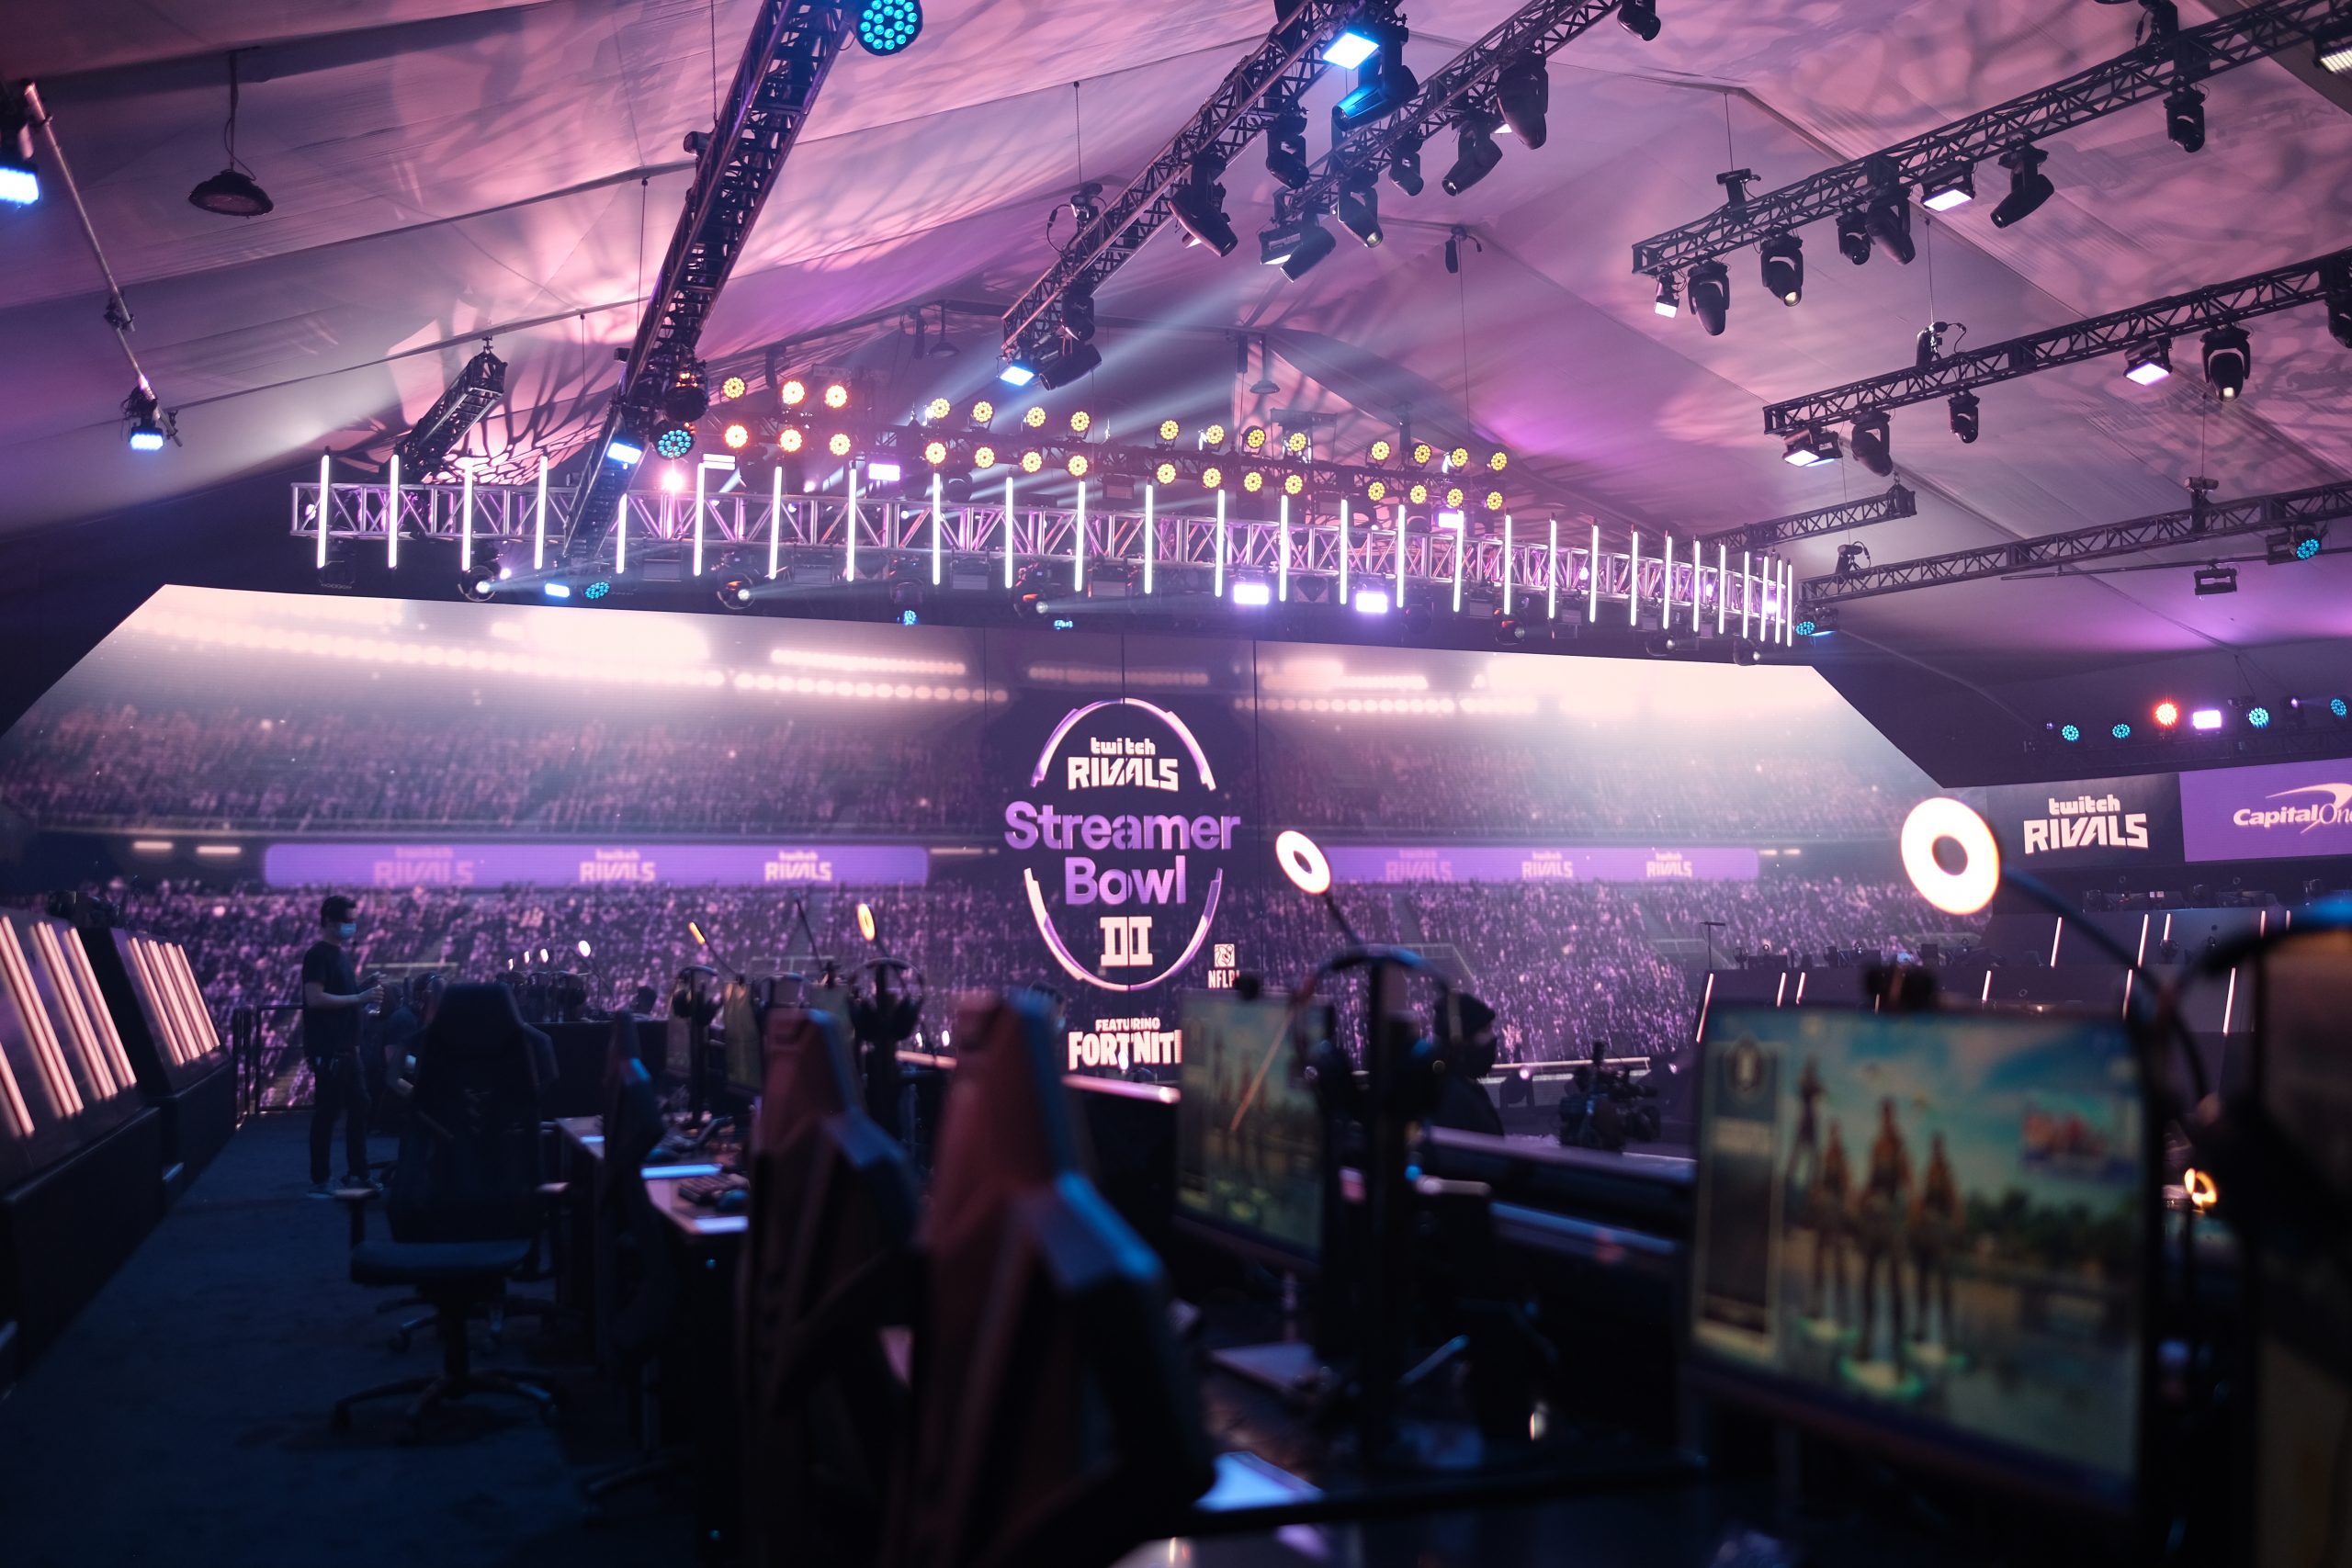 Twitch Rivals Streamer Bowl III Returns to Onsite Production, Debuts One-of-a-Kind Arena at LA Live